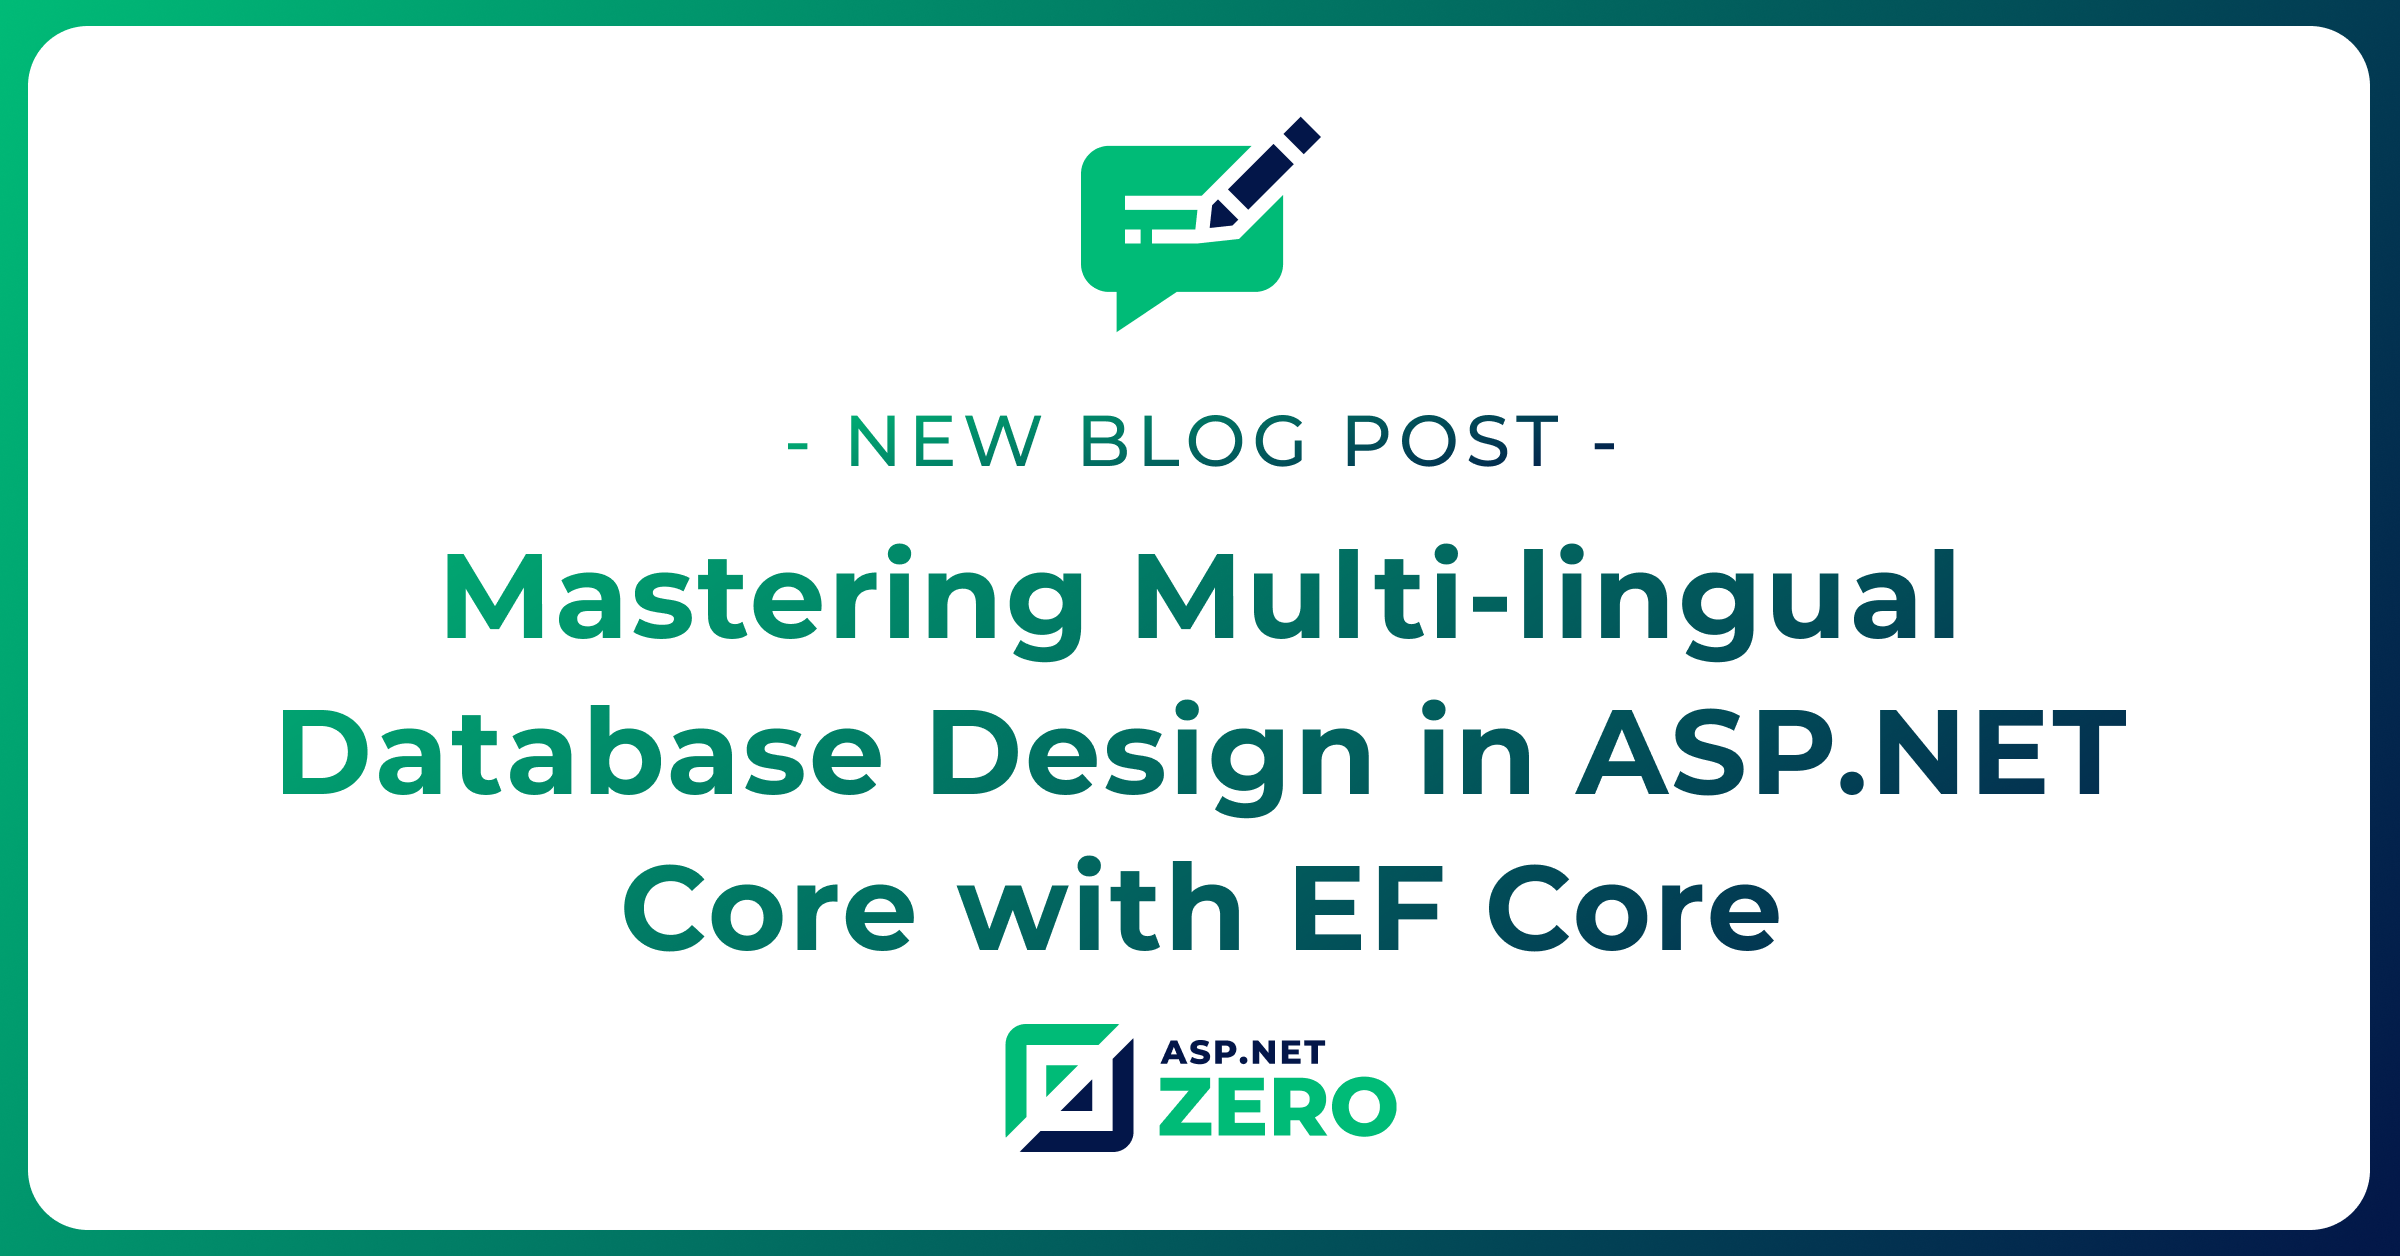 Mastering Multi-lingual Database Design in ASP.NET Core with EF Core